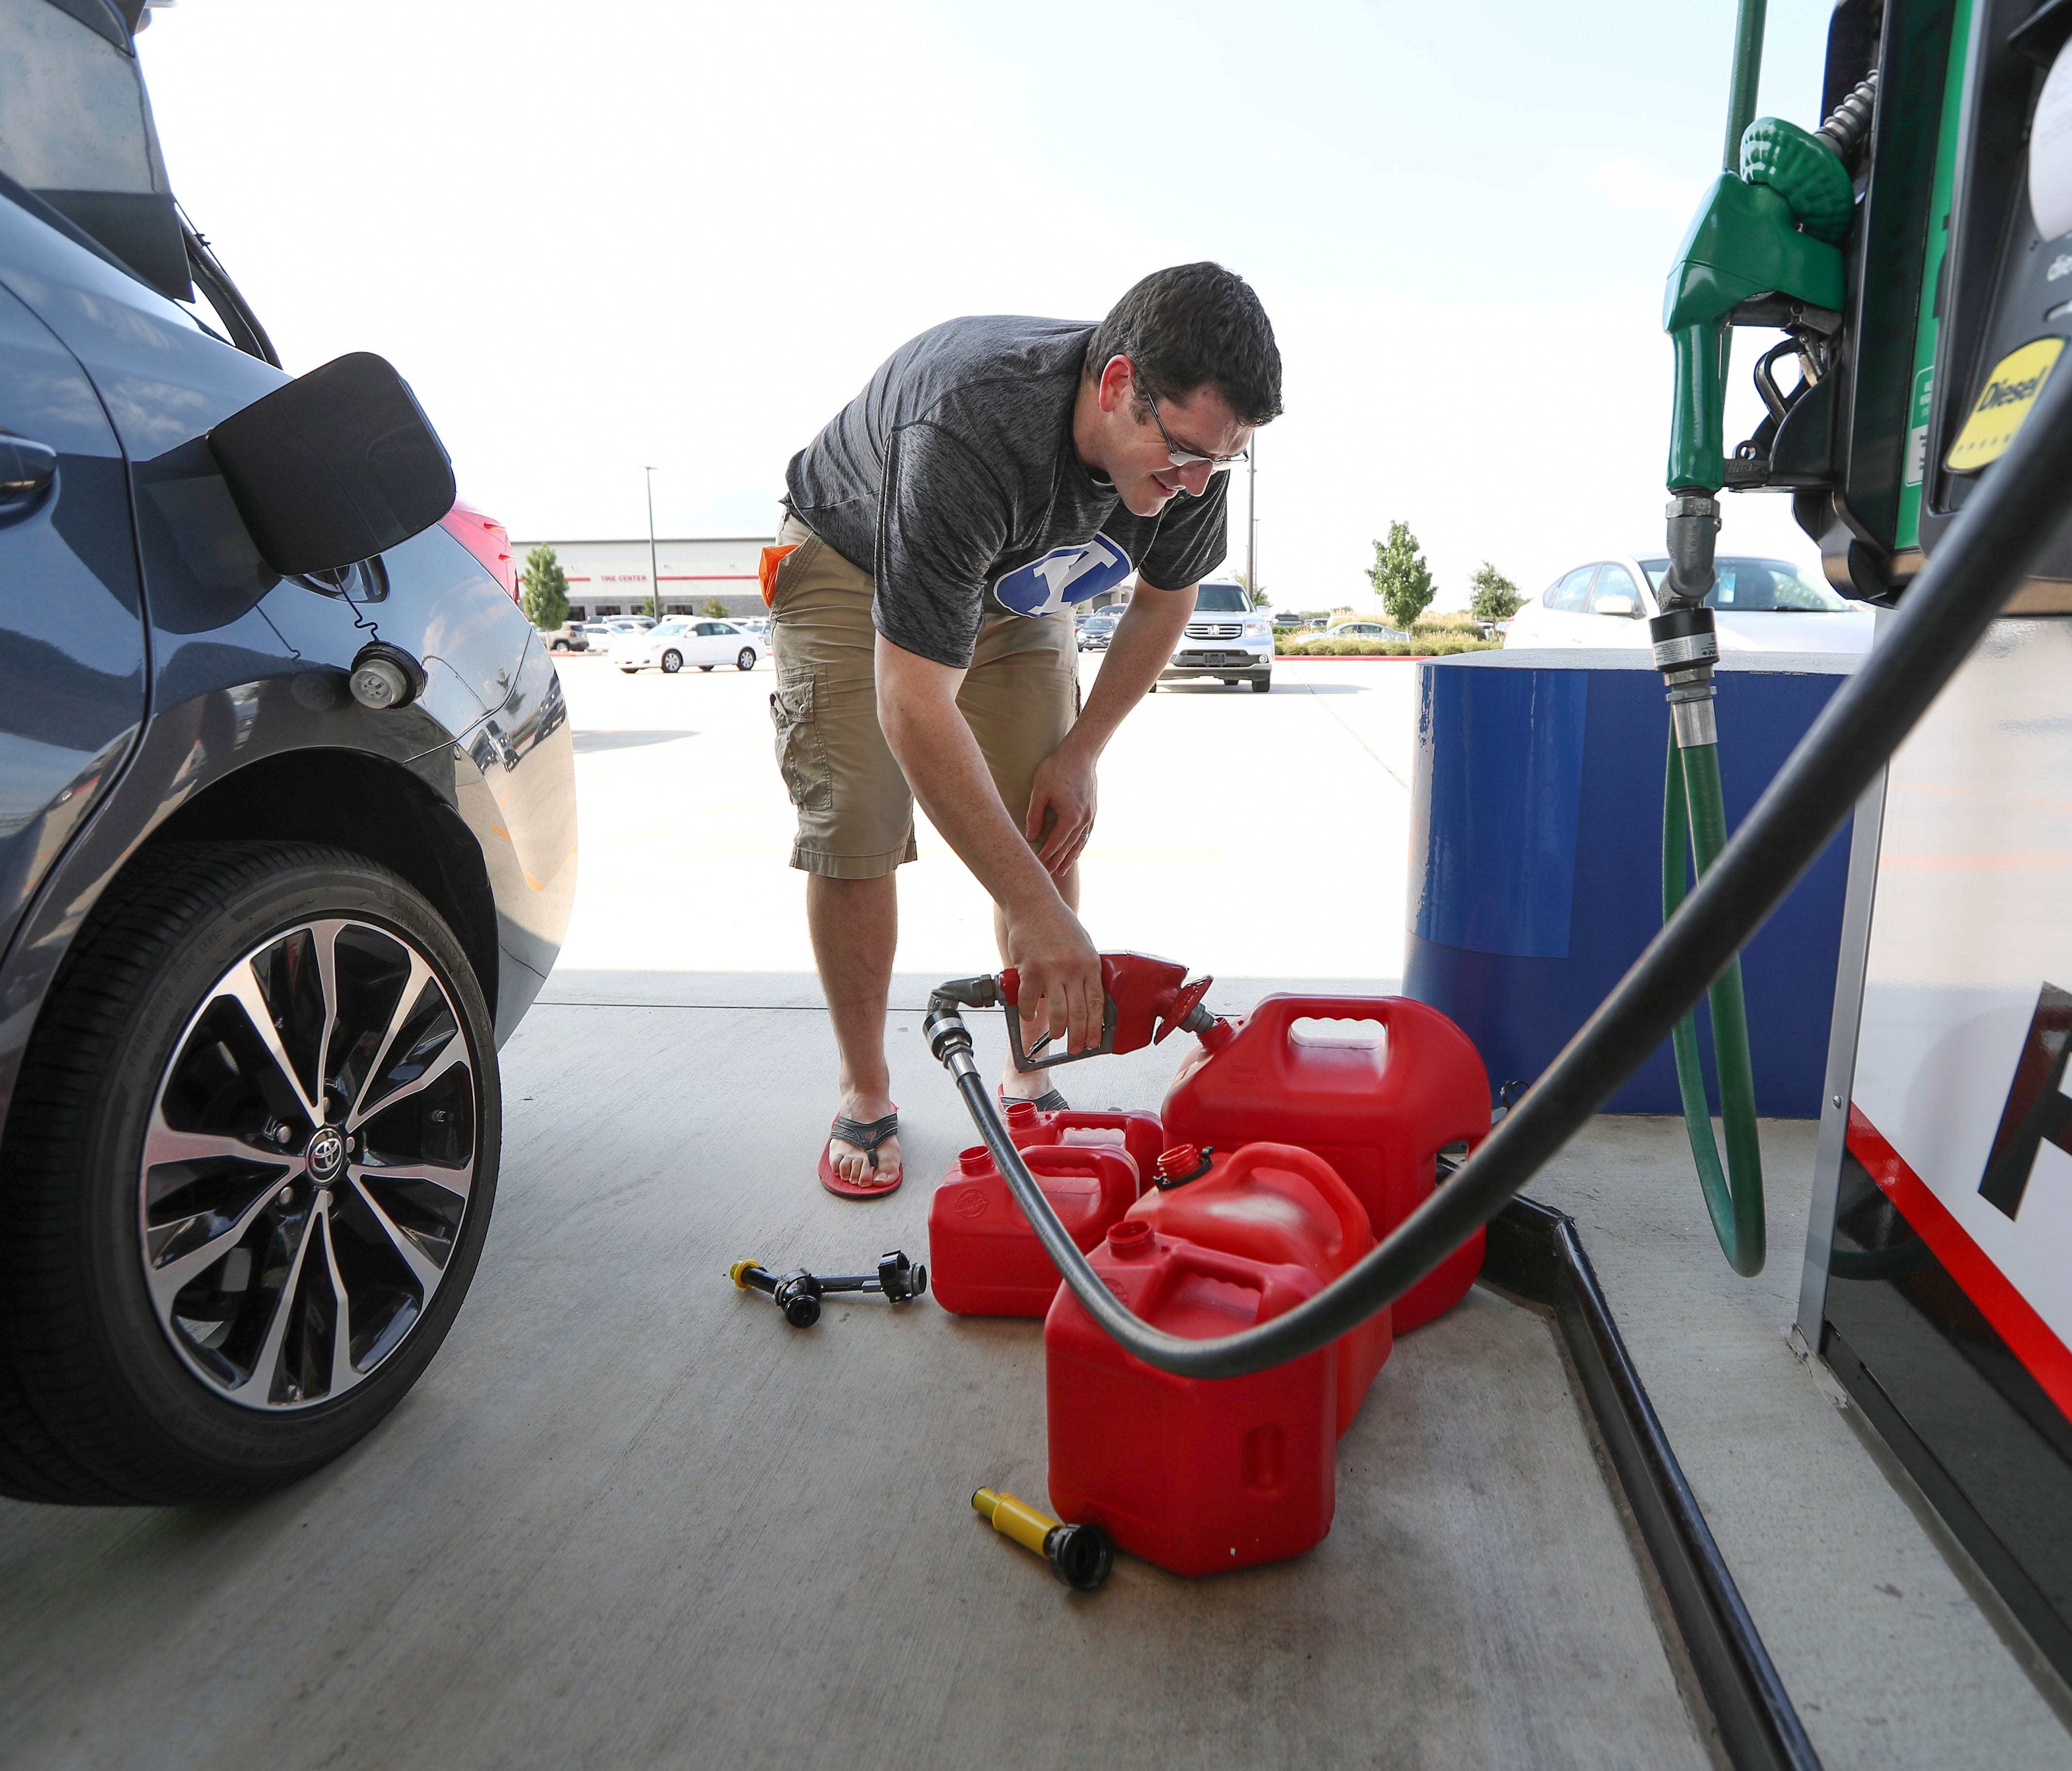 Chris Mathew fills his vehicle and five gas cans at Costco in preparation for tropical weather on Wednesday, Aug. 23, 2017, in Pearland, Texas.